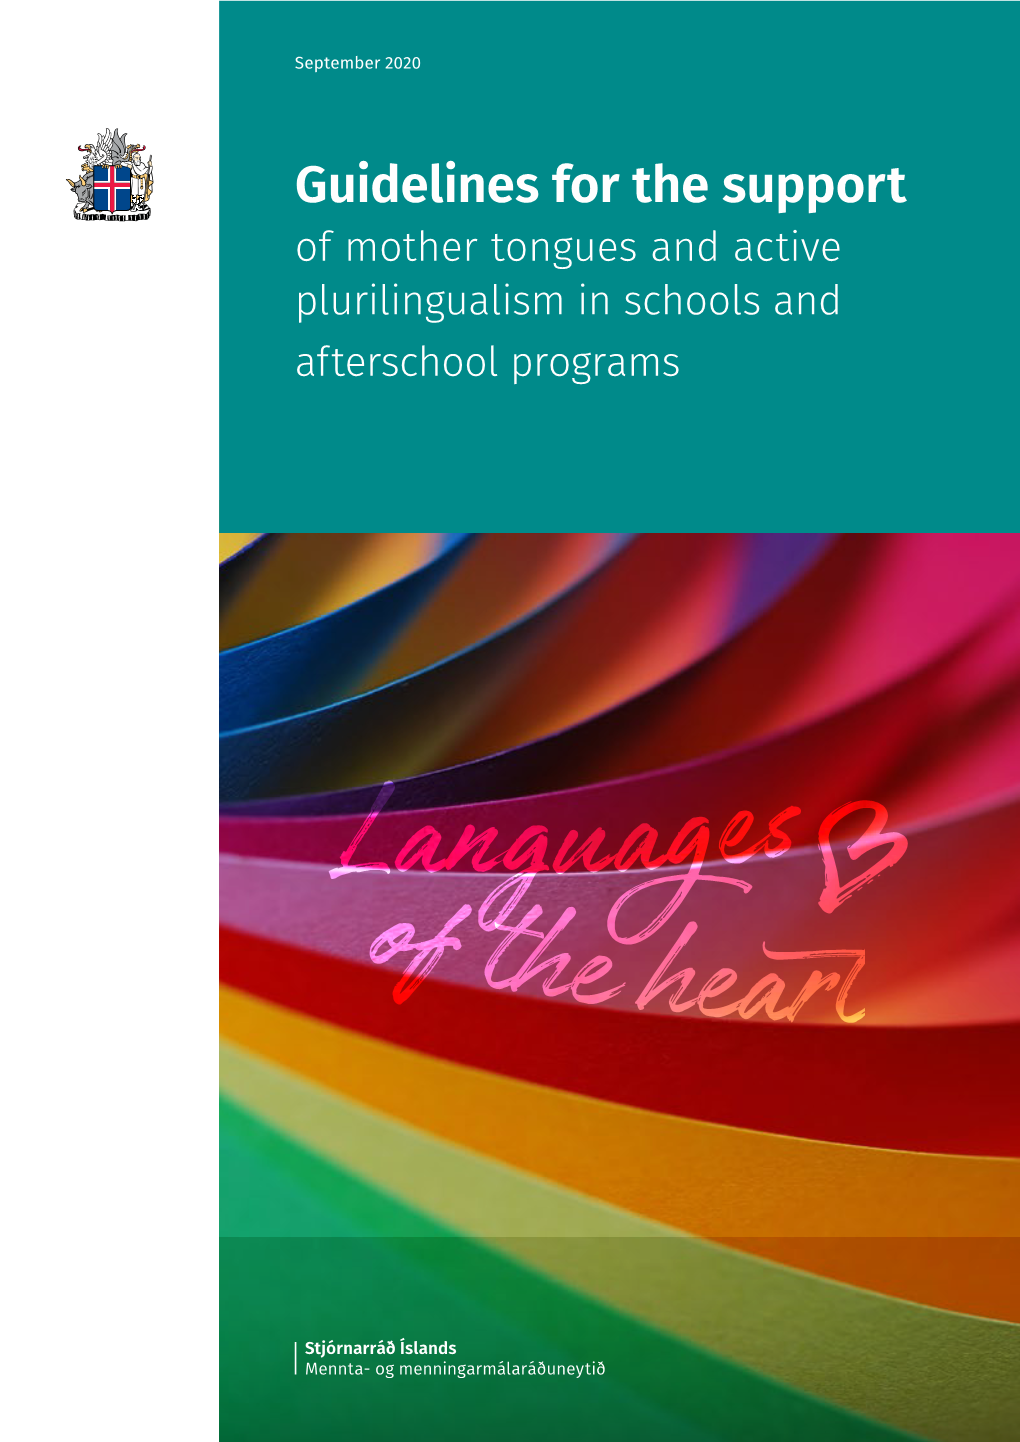 Guidelines for the Support of Mother Tongues and Active Plurilingualism in School and Afterschool Programs